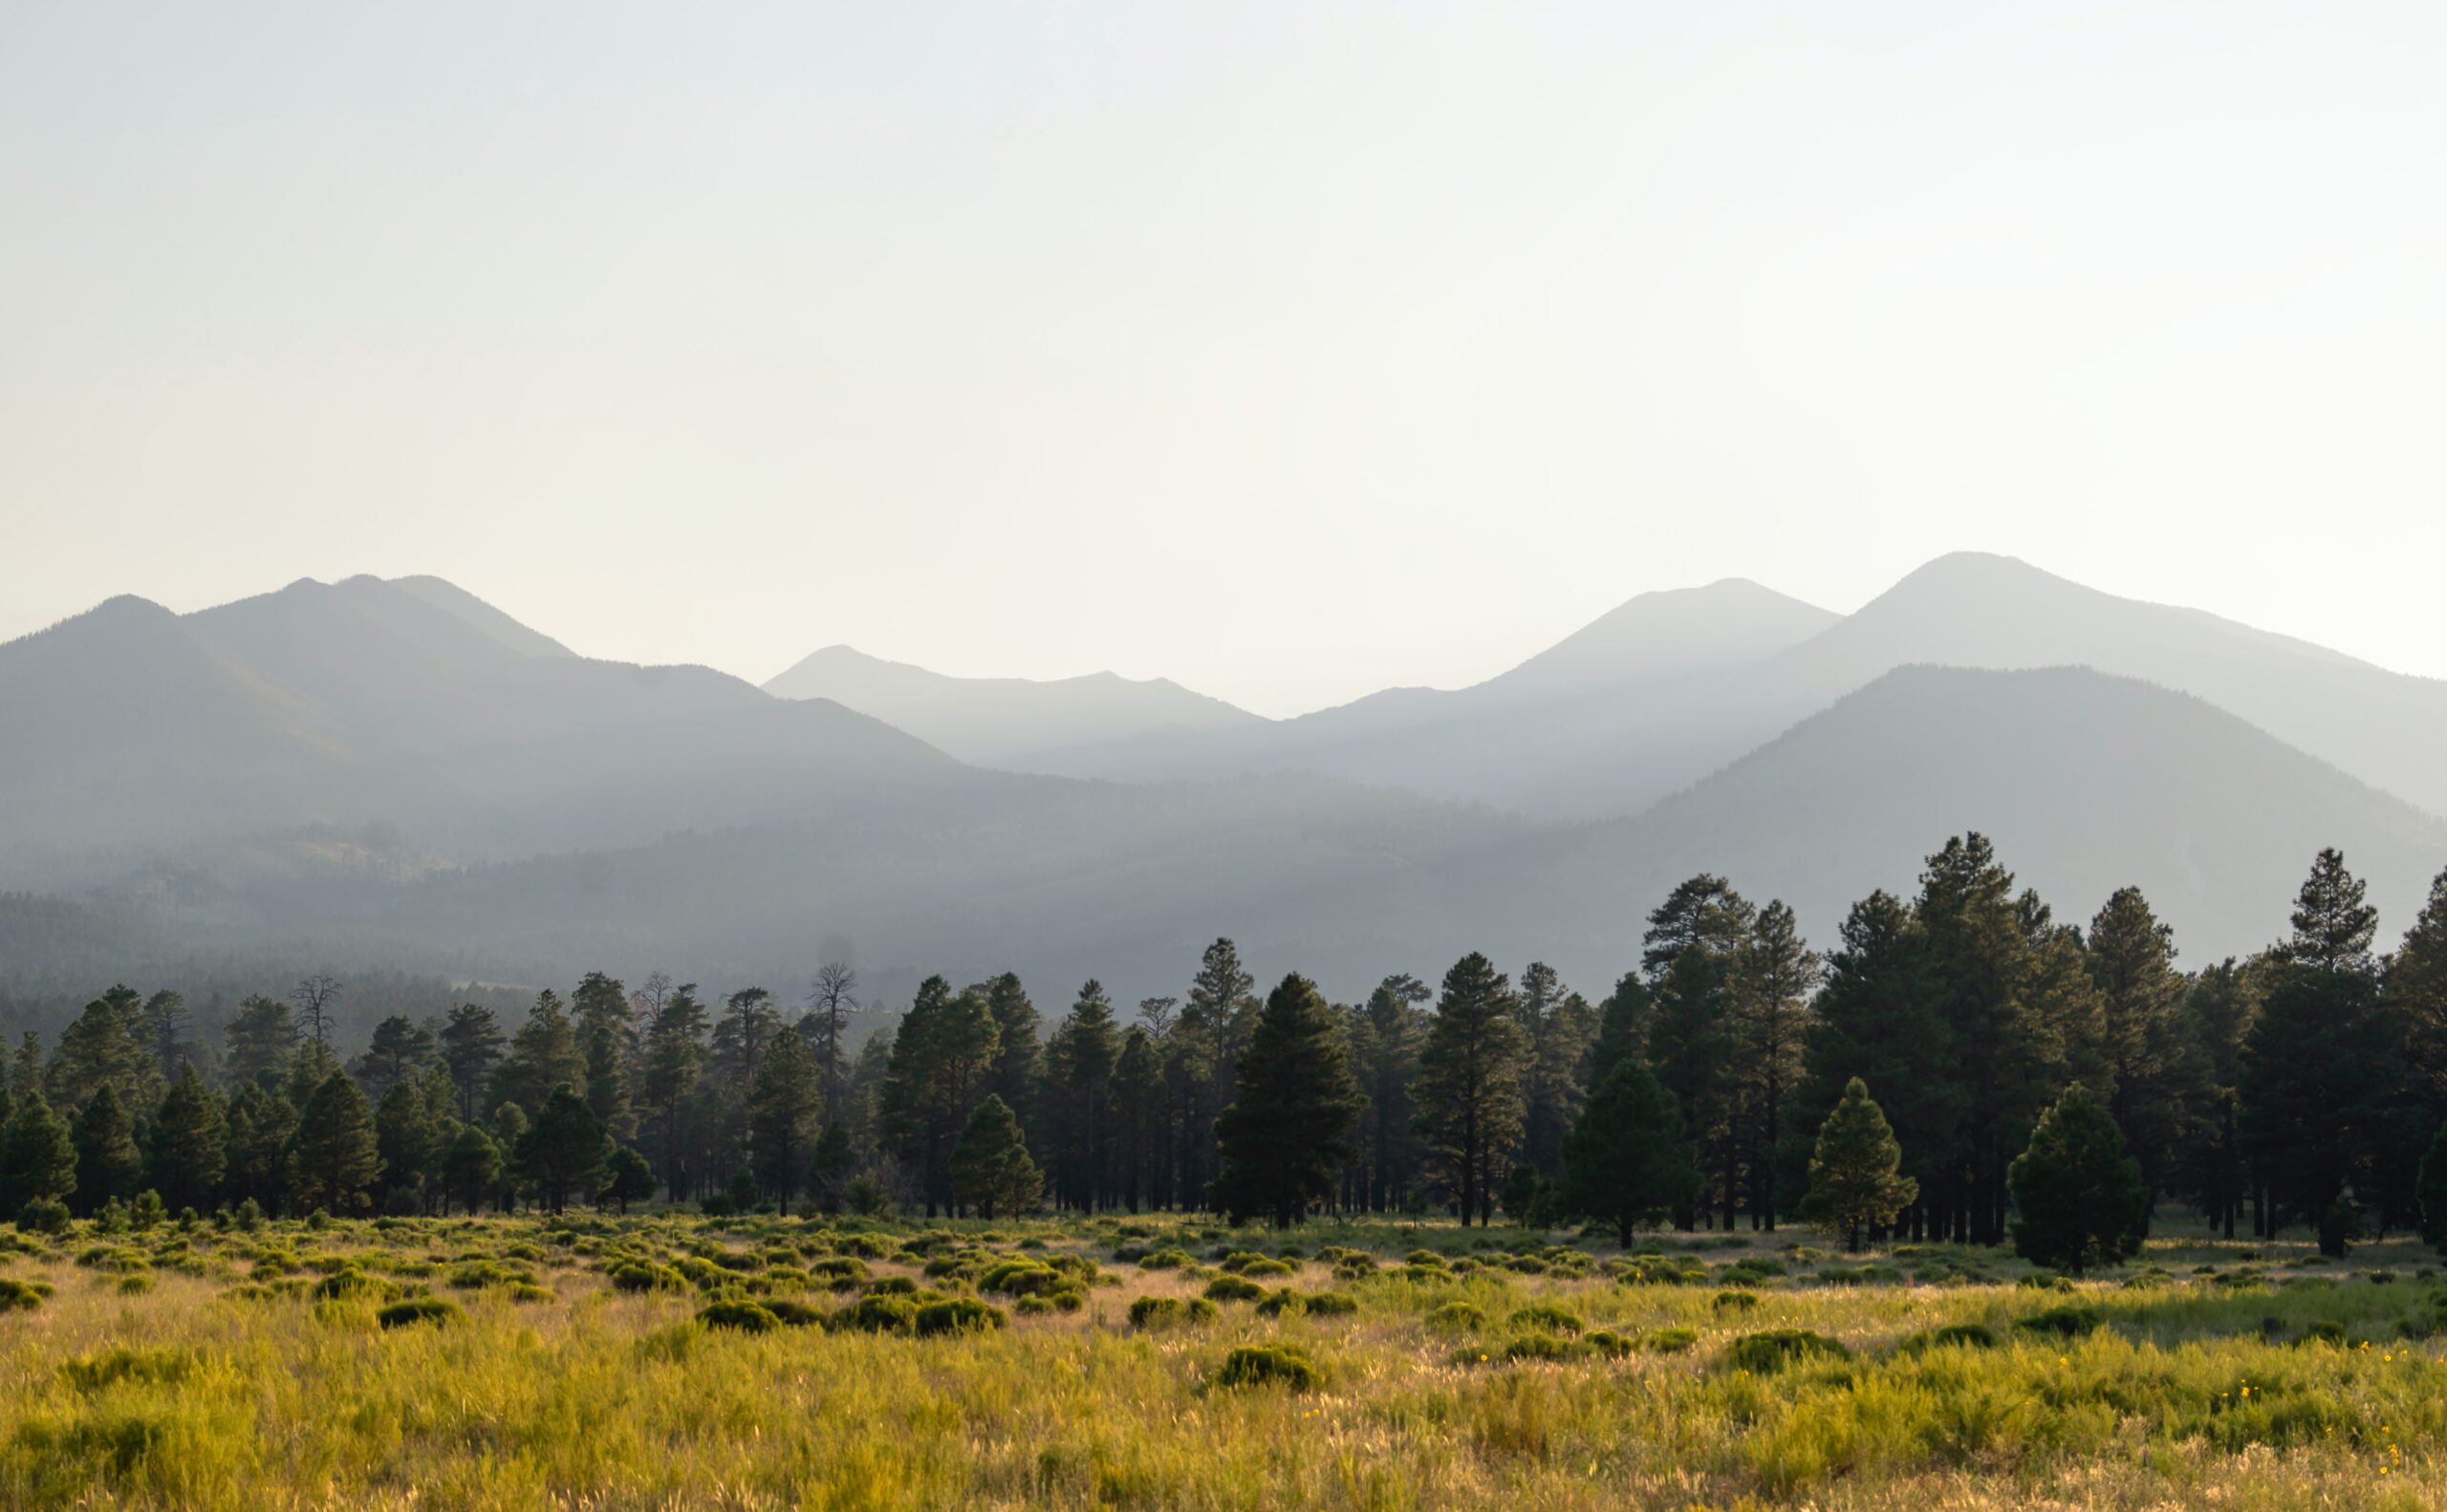 Flagstaff is one of the best places in Arizona to live for those who love hiking and want to live near the Grand Canyon. Pictured: Mountain views in Flagstaff, Arizona